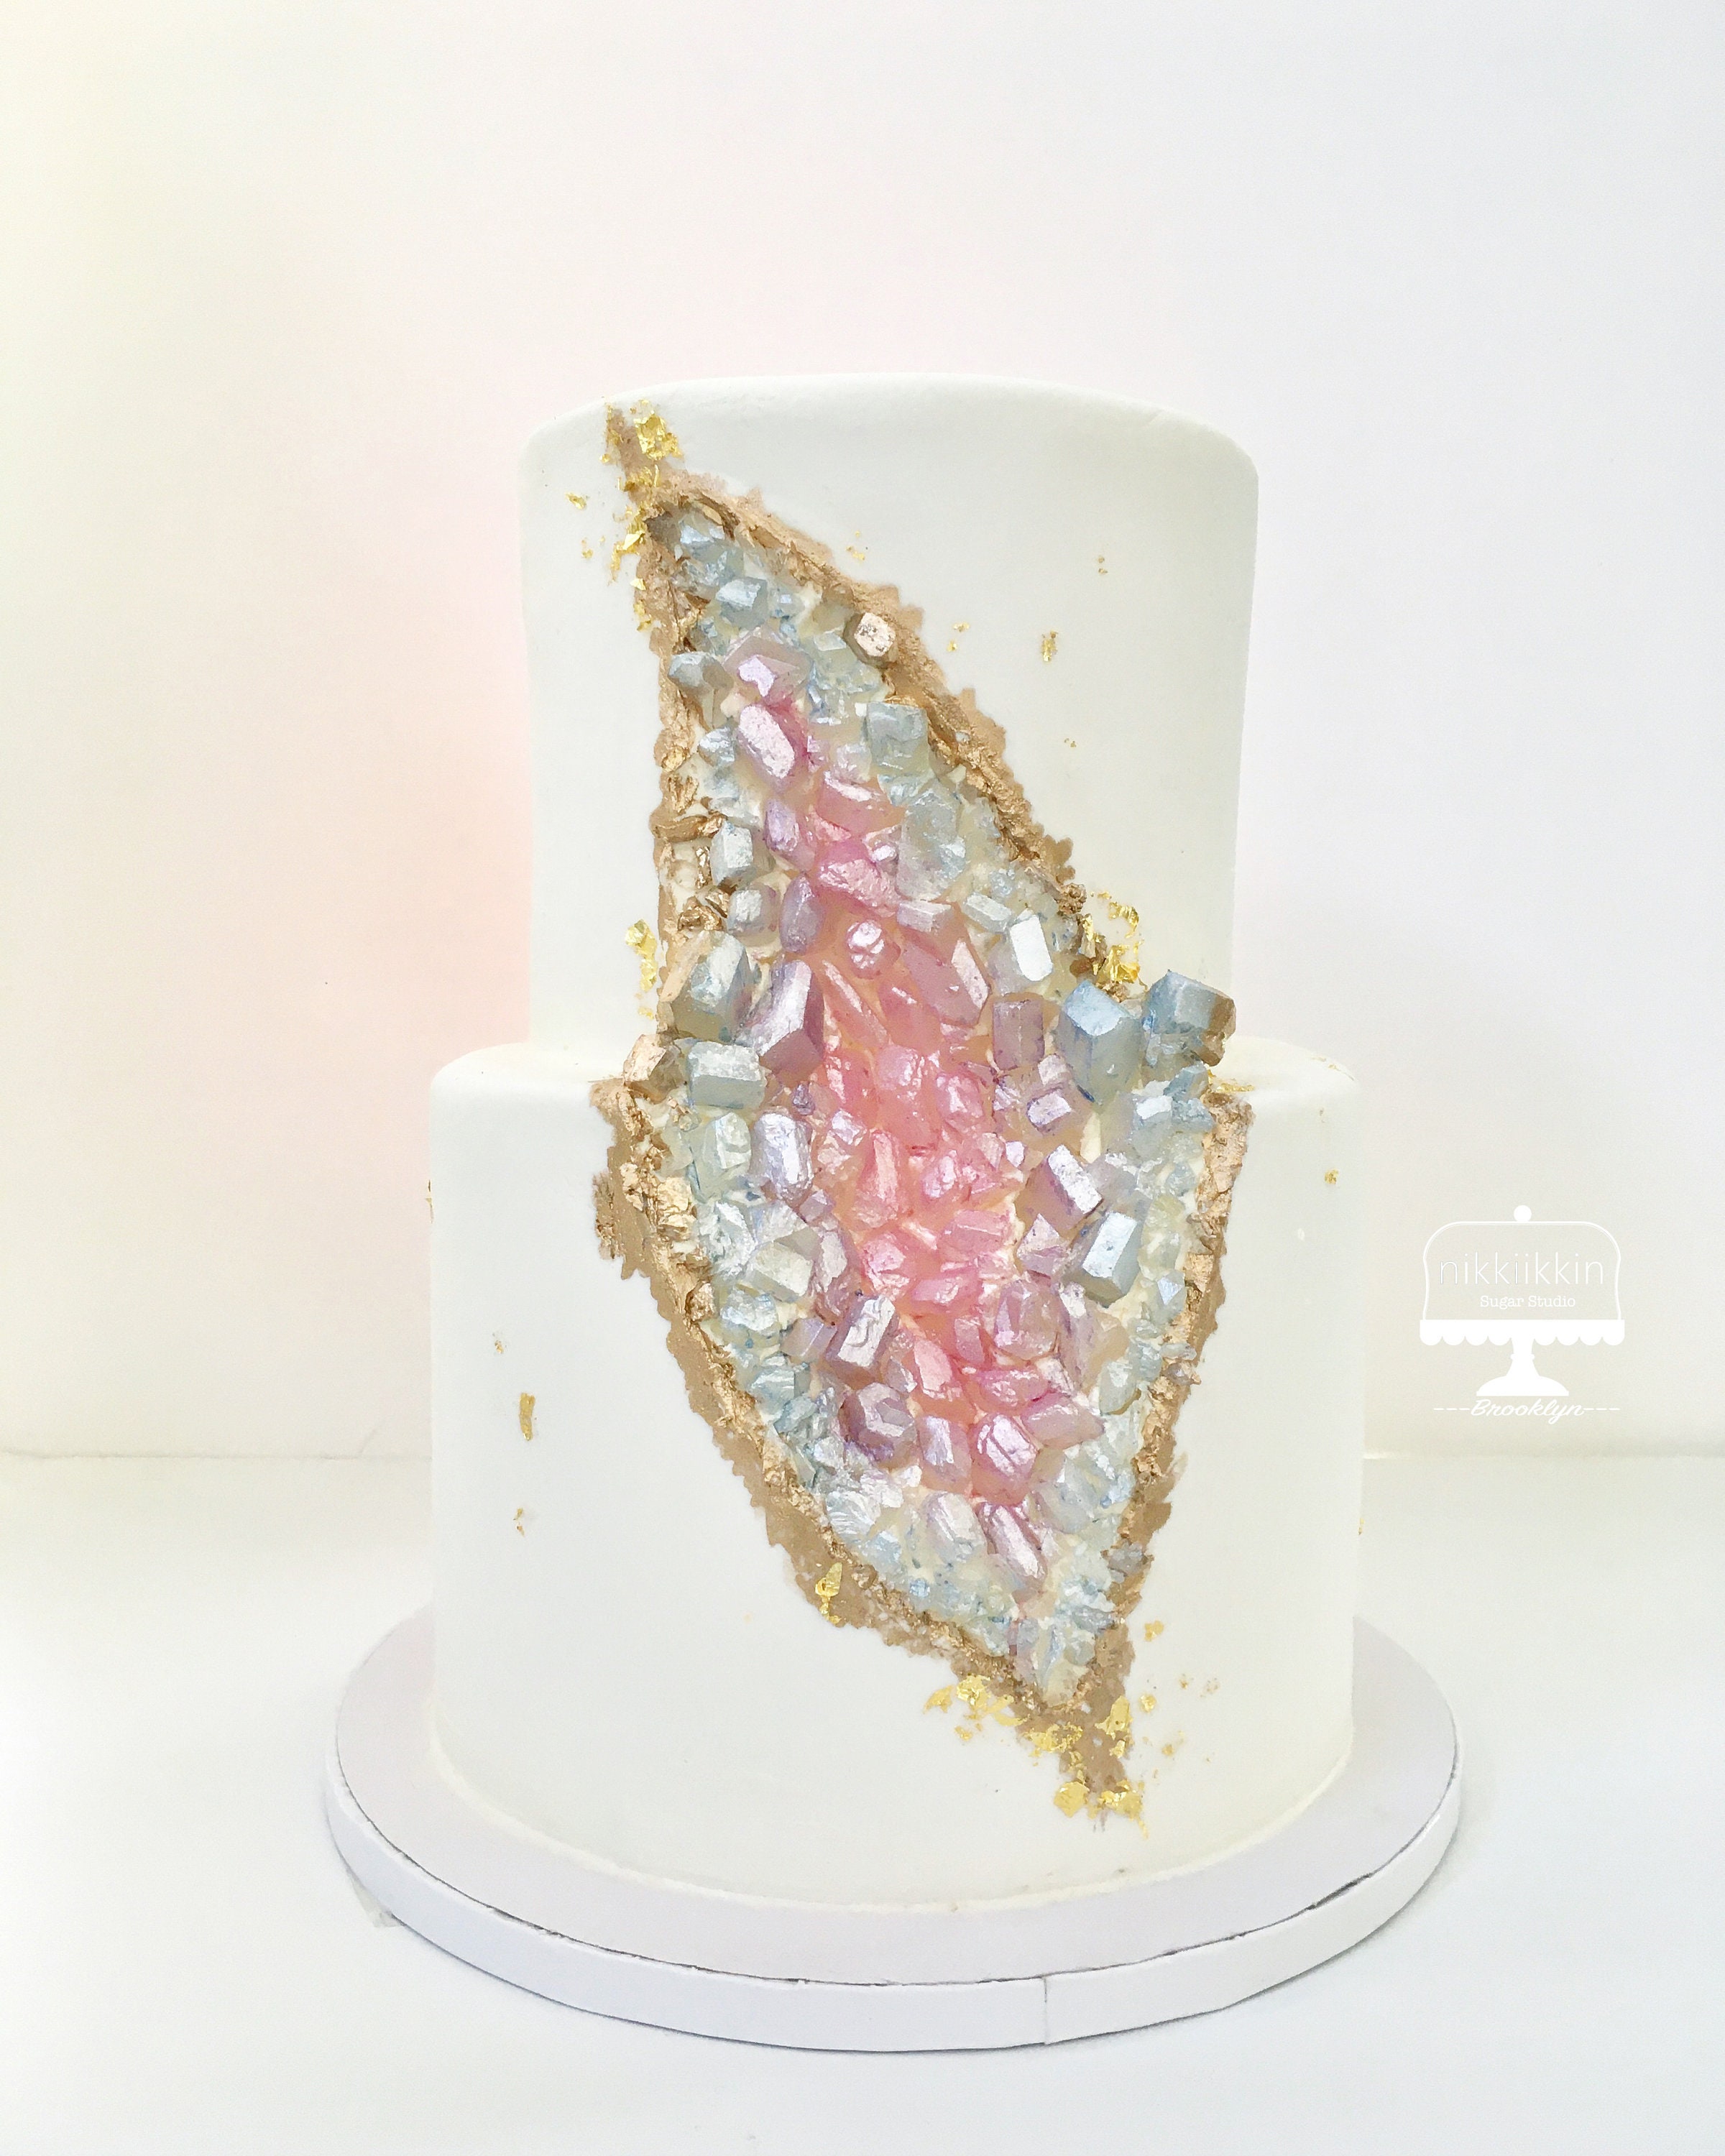 The Most Beautiful Crystal Cakes You Will Ever See